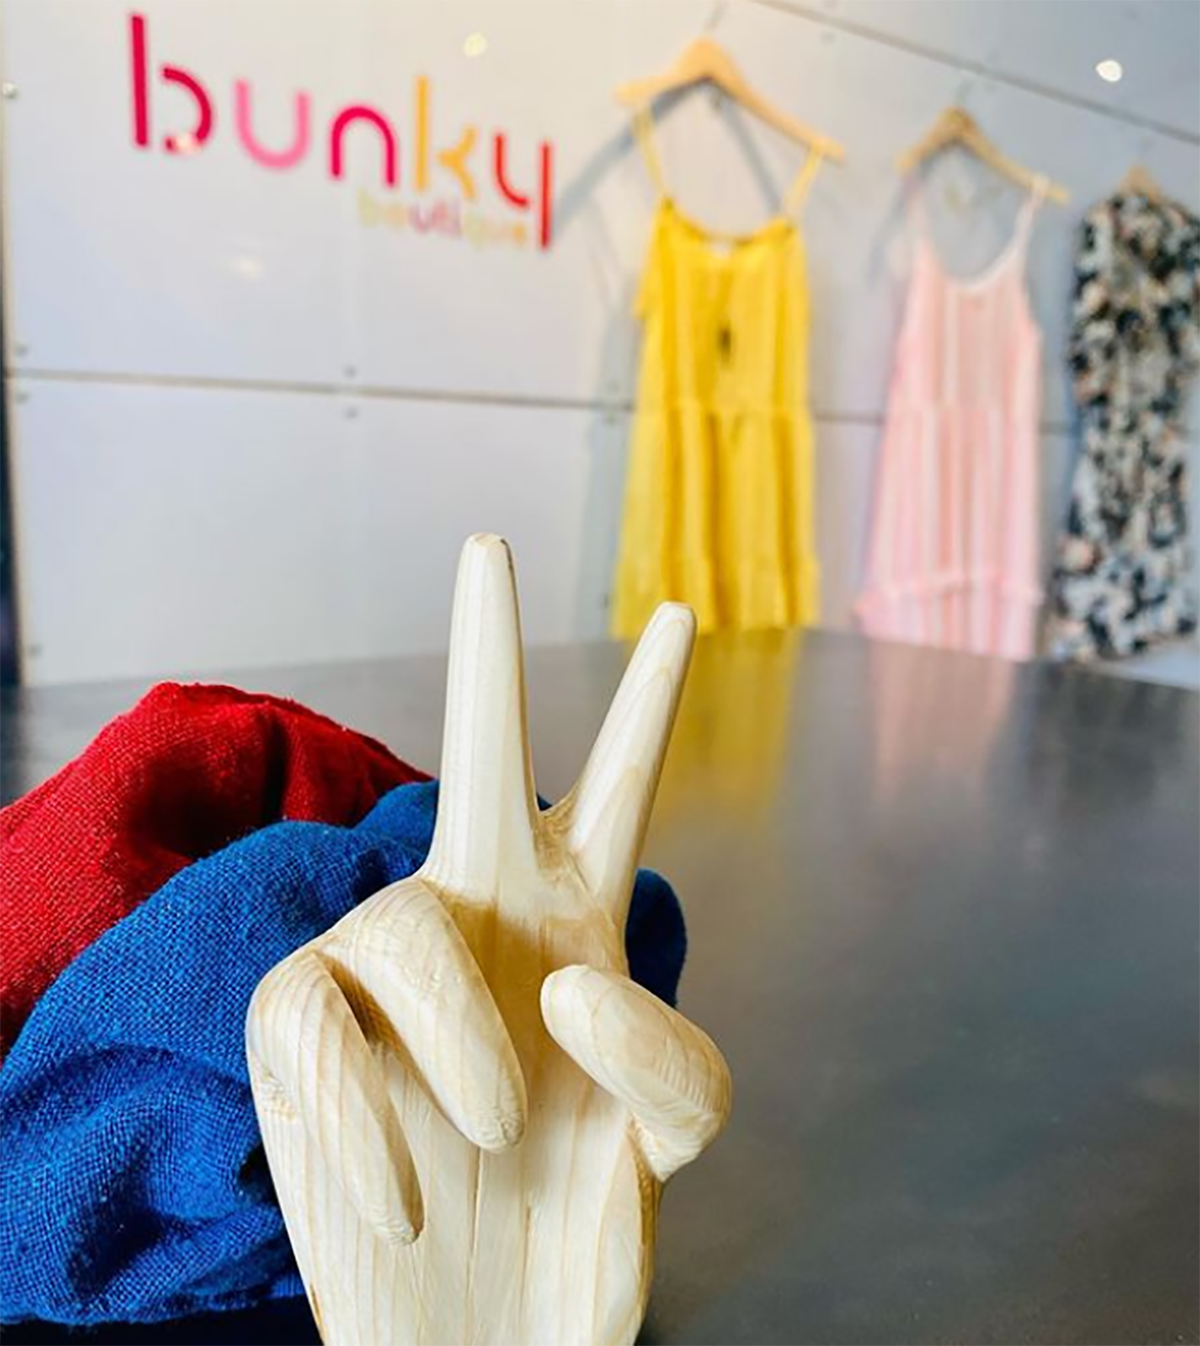 Bunky Boutique Heading for Gilbert